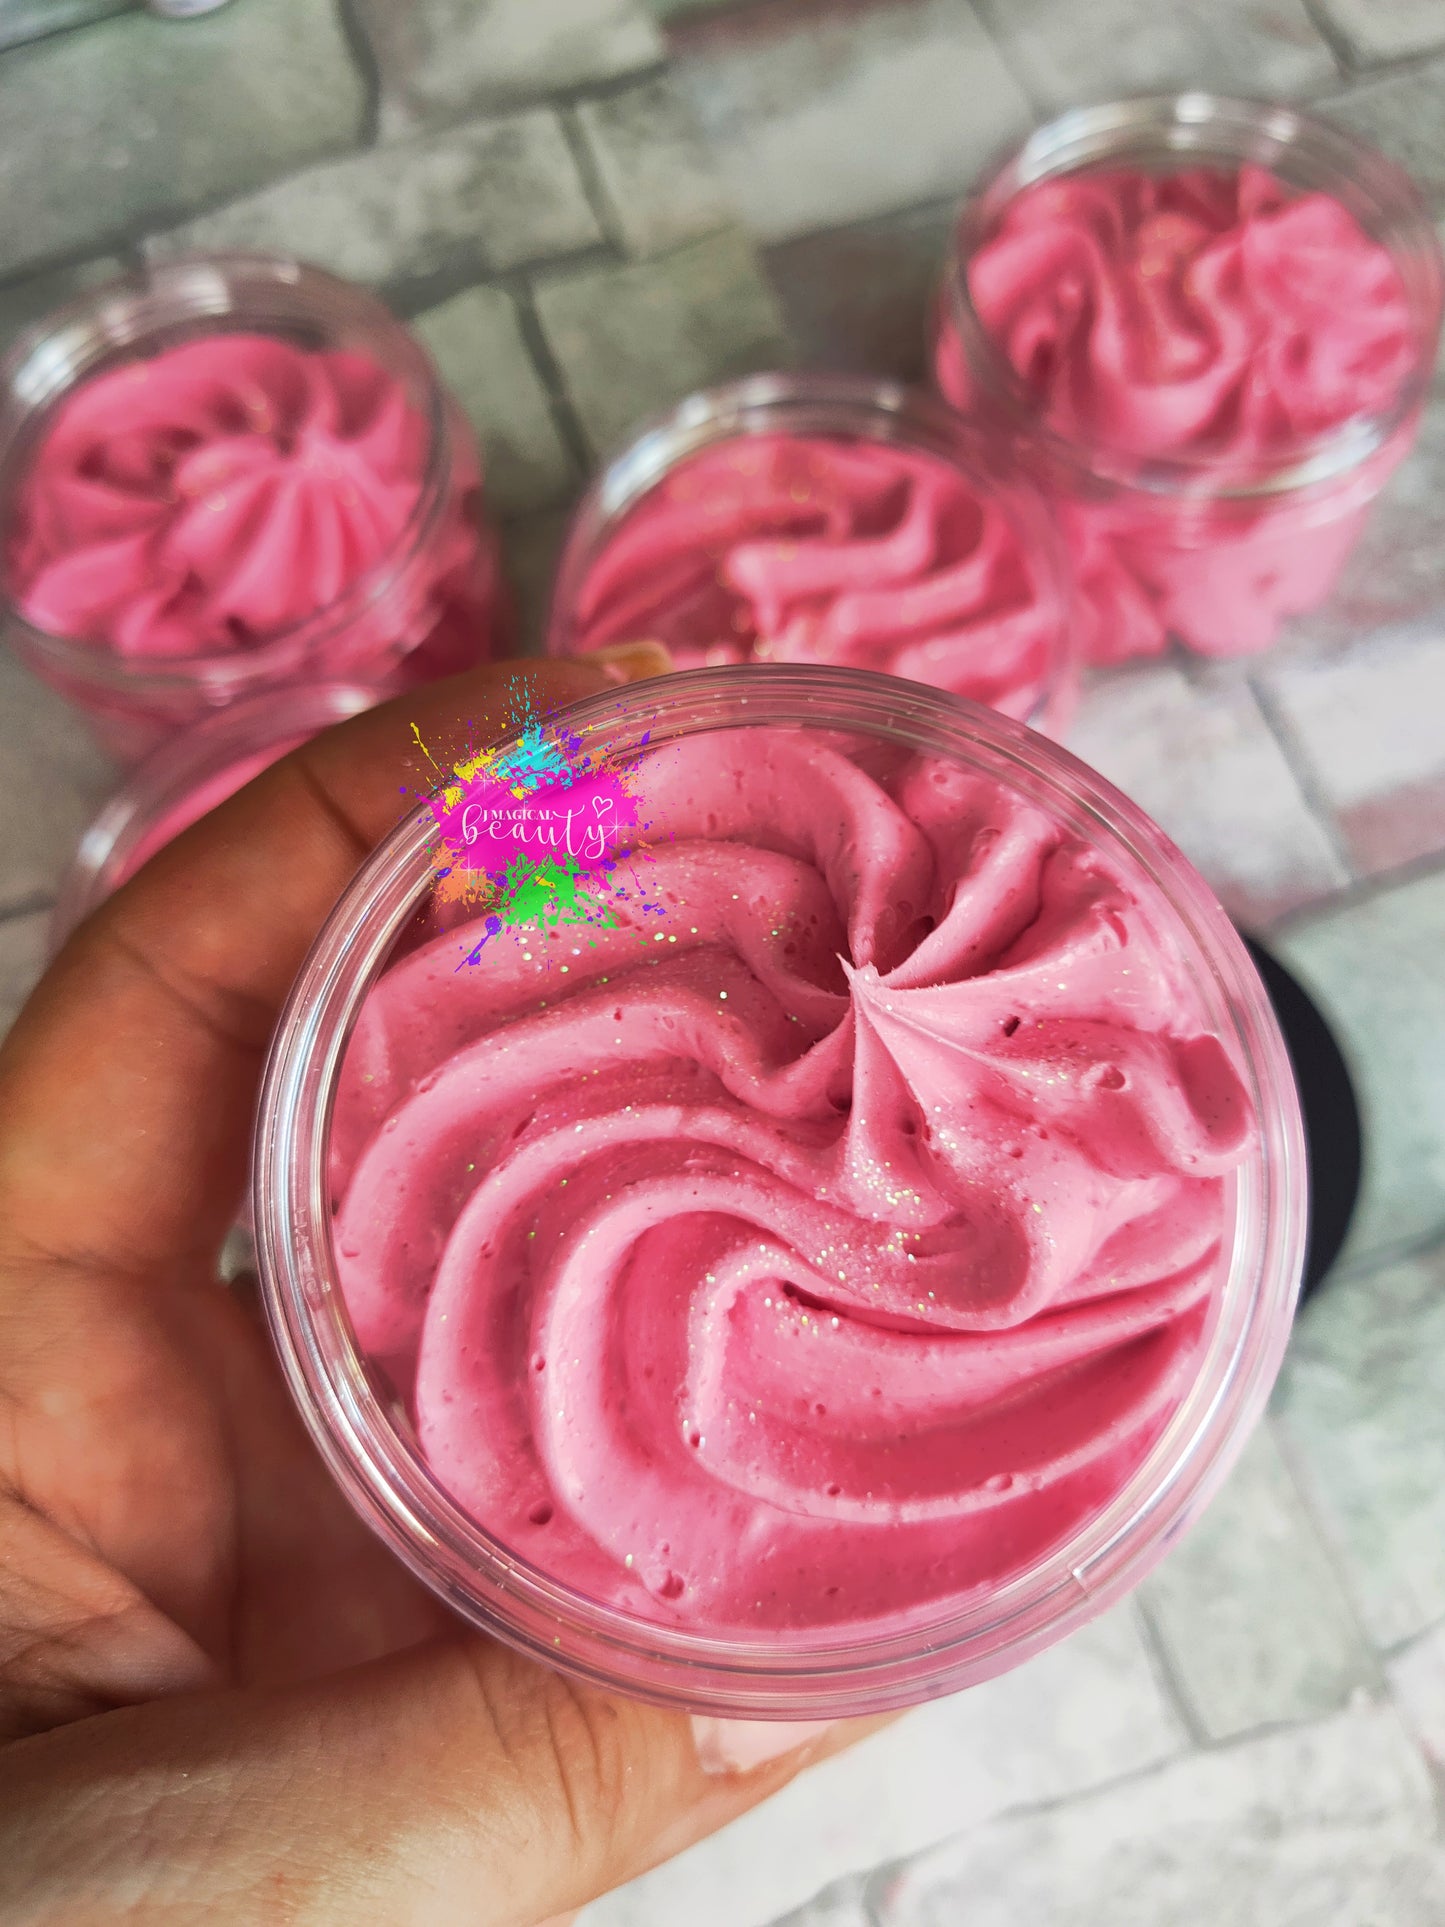 Whipped Soap Juicy Strawberry scent